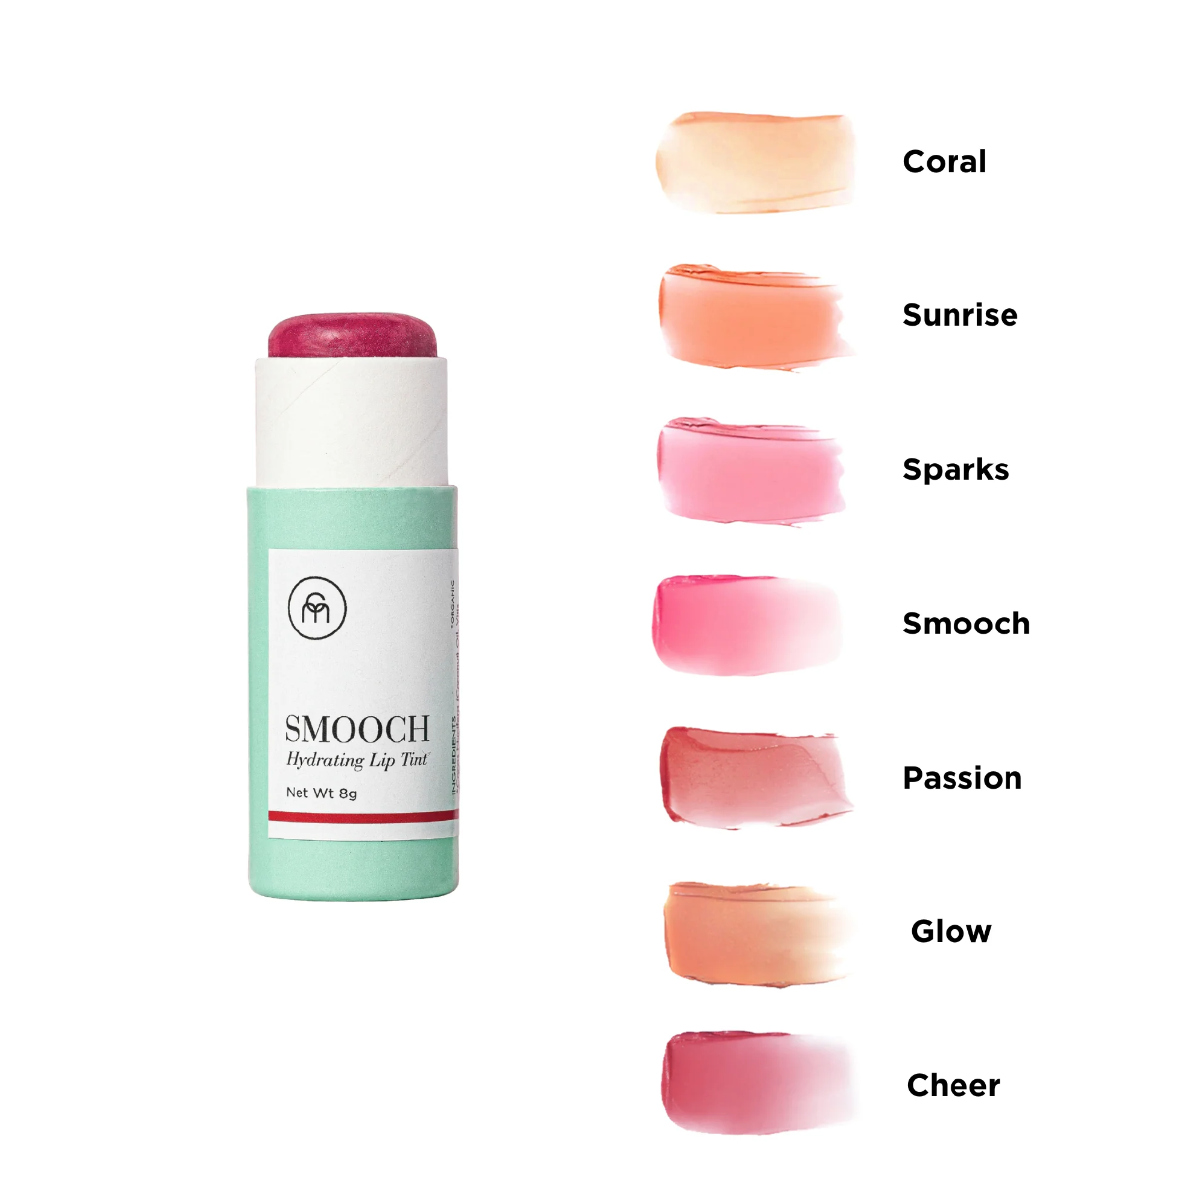 A pale green and white tube of Coconut Matter lip balm tint along side a column of colored lip tint swatches on a white background. 